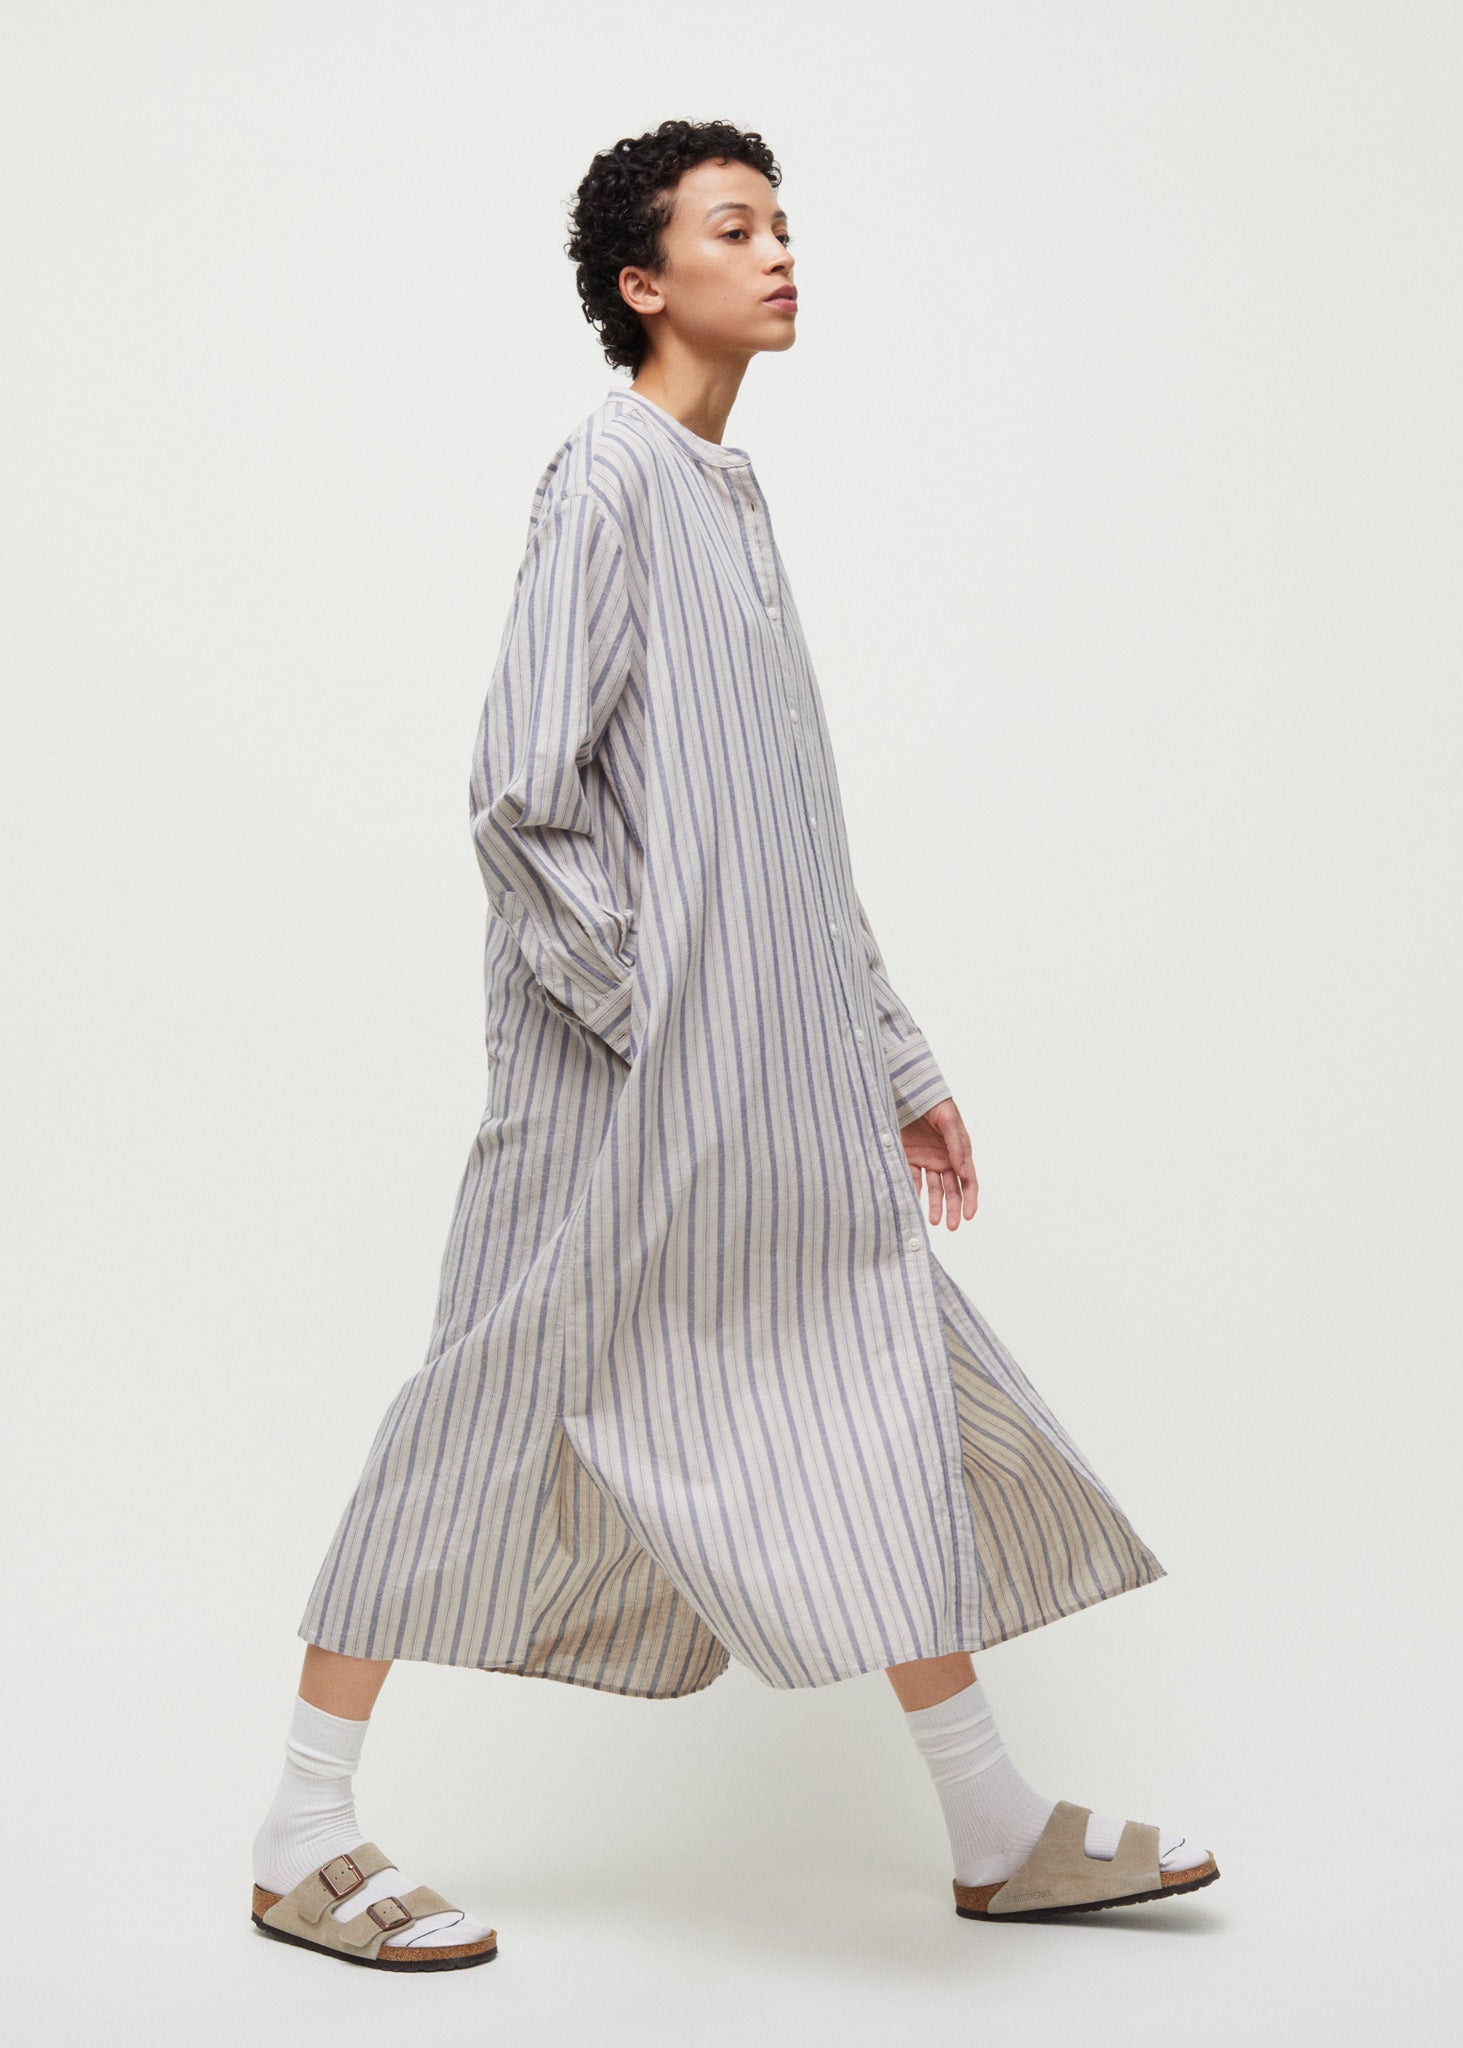 Summer robe lucca | Mix Lucca